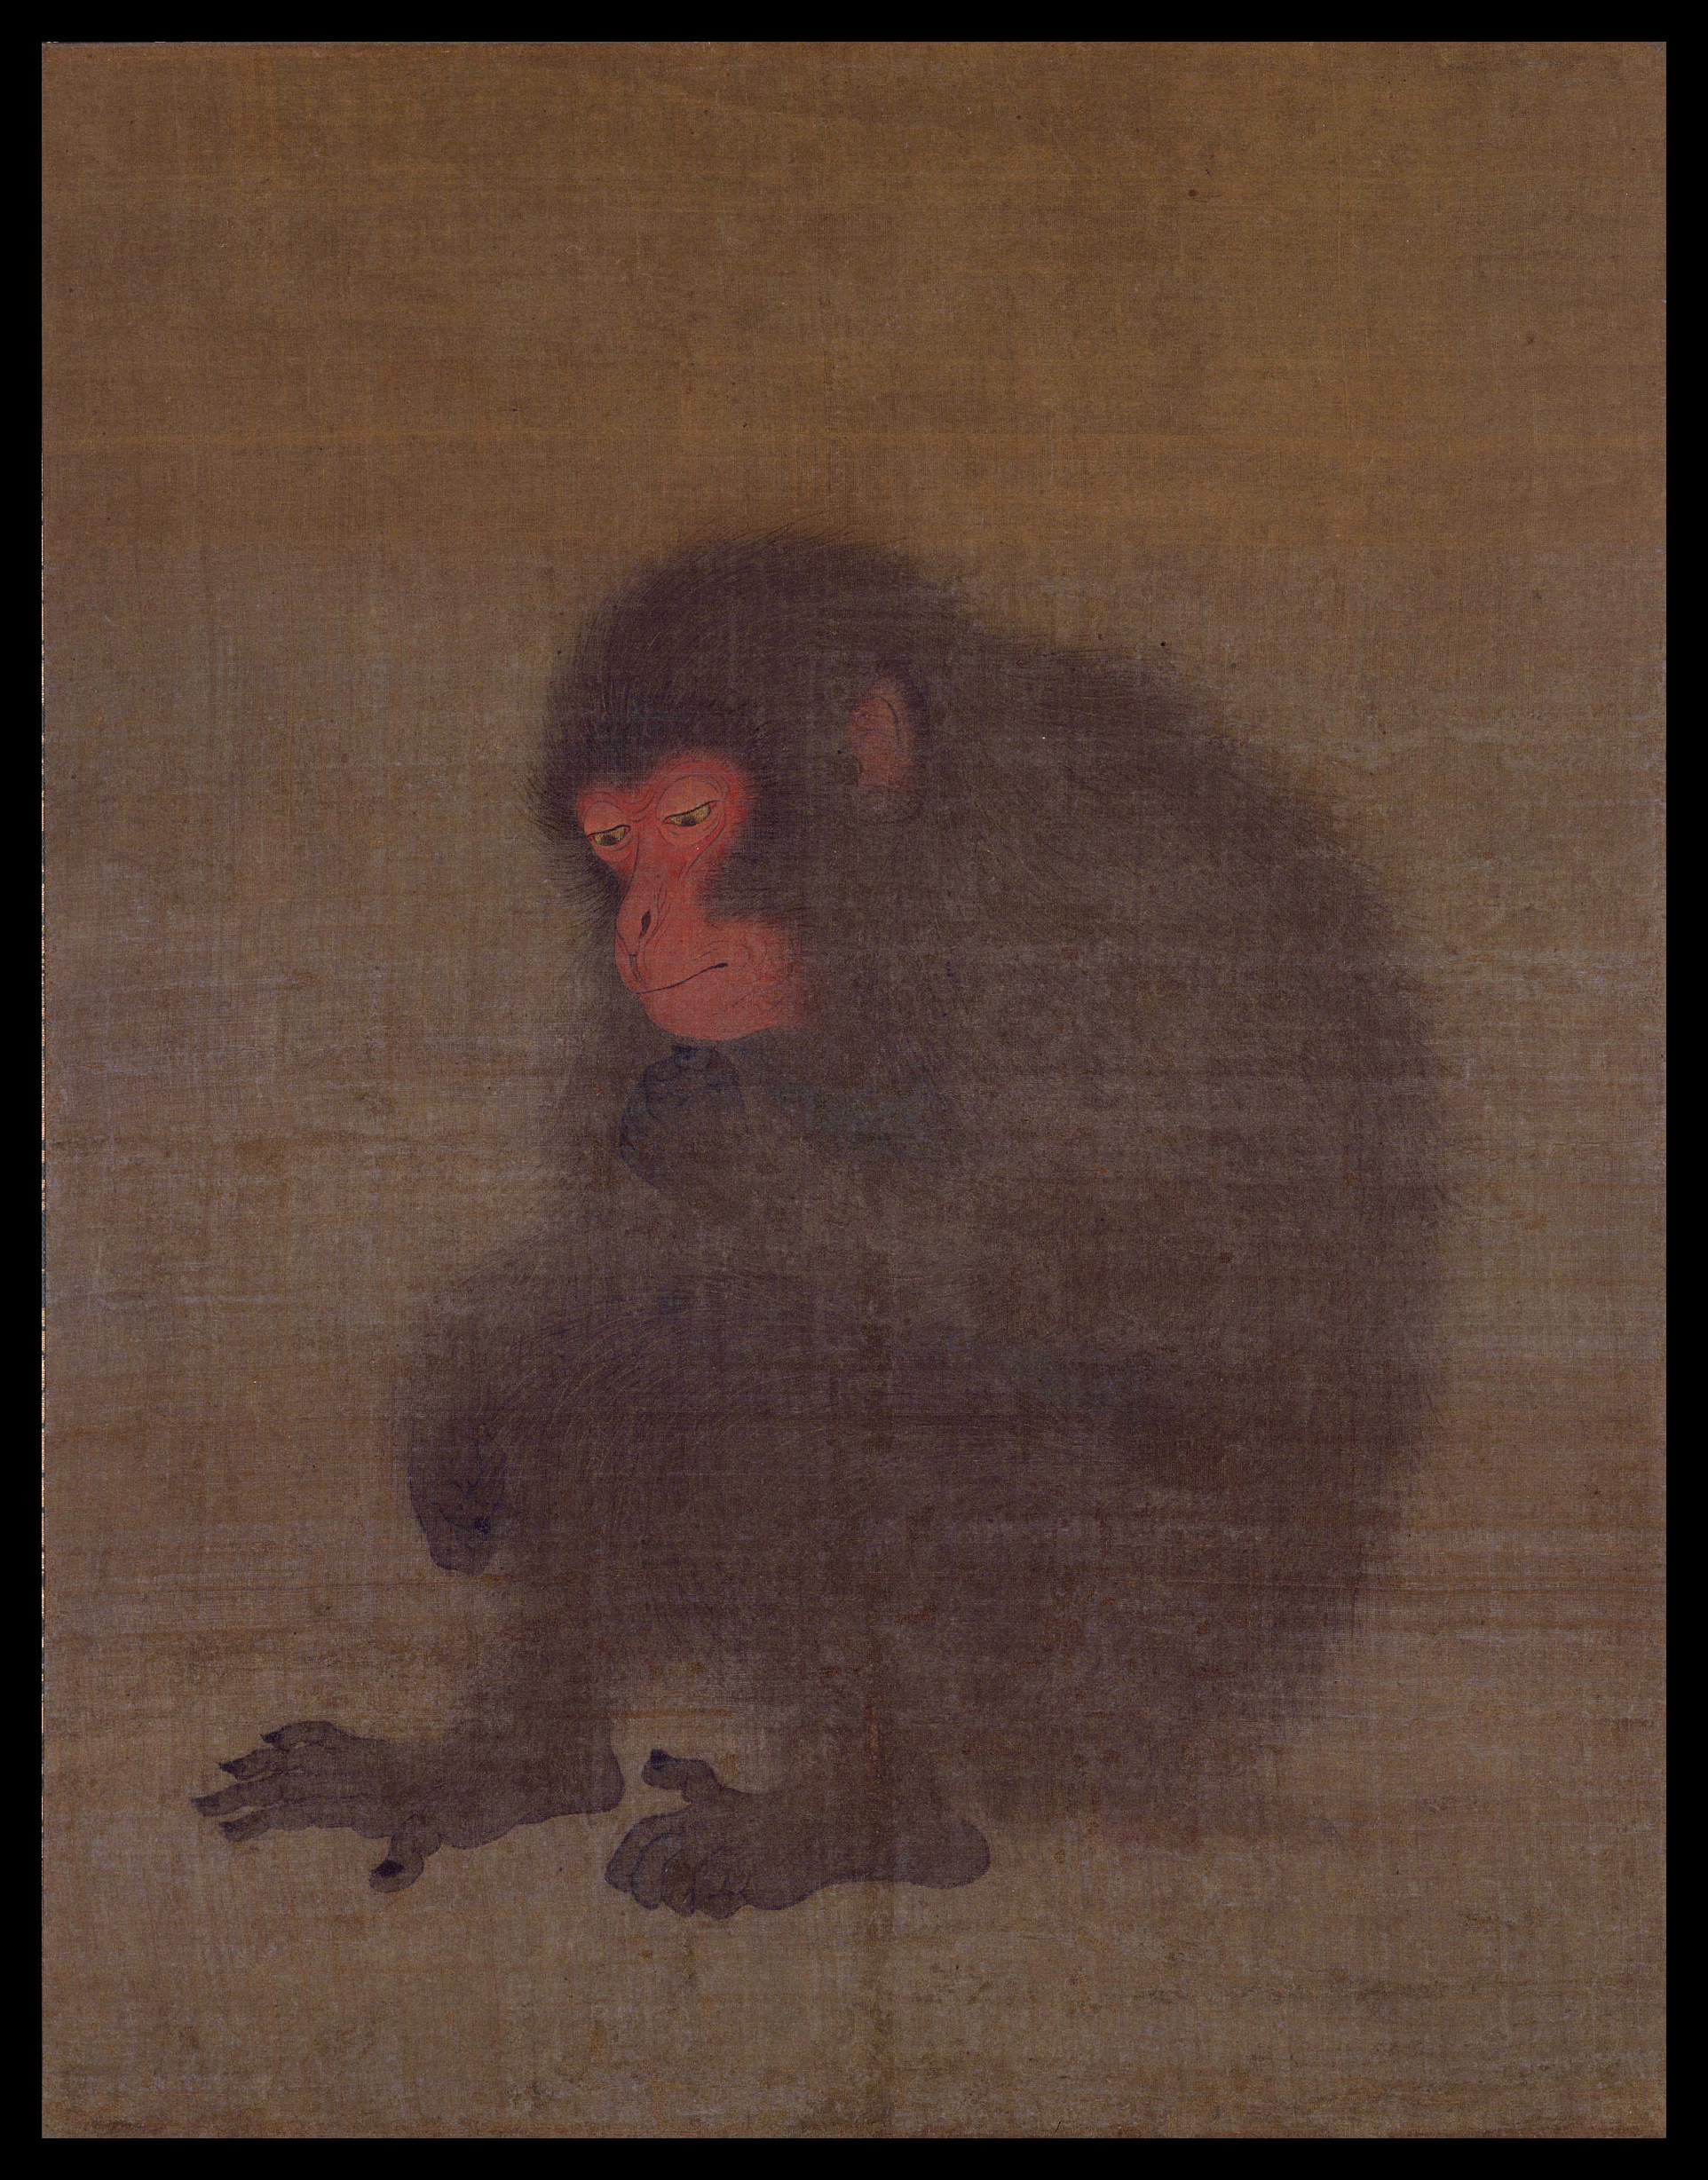 Un singe by Mao Song - 2nd quarter 12th century 